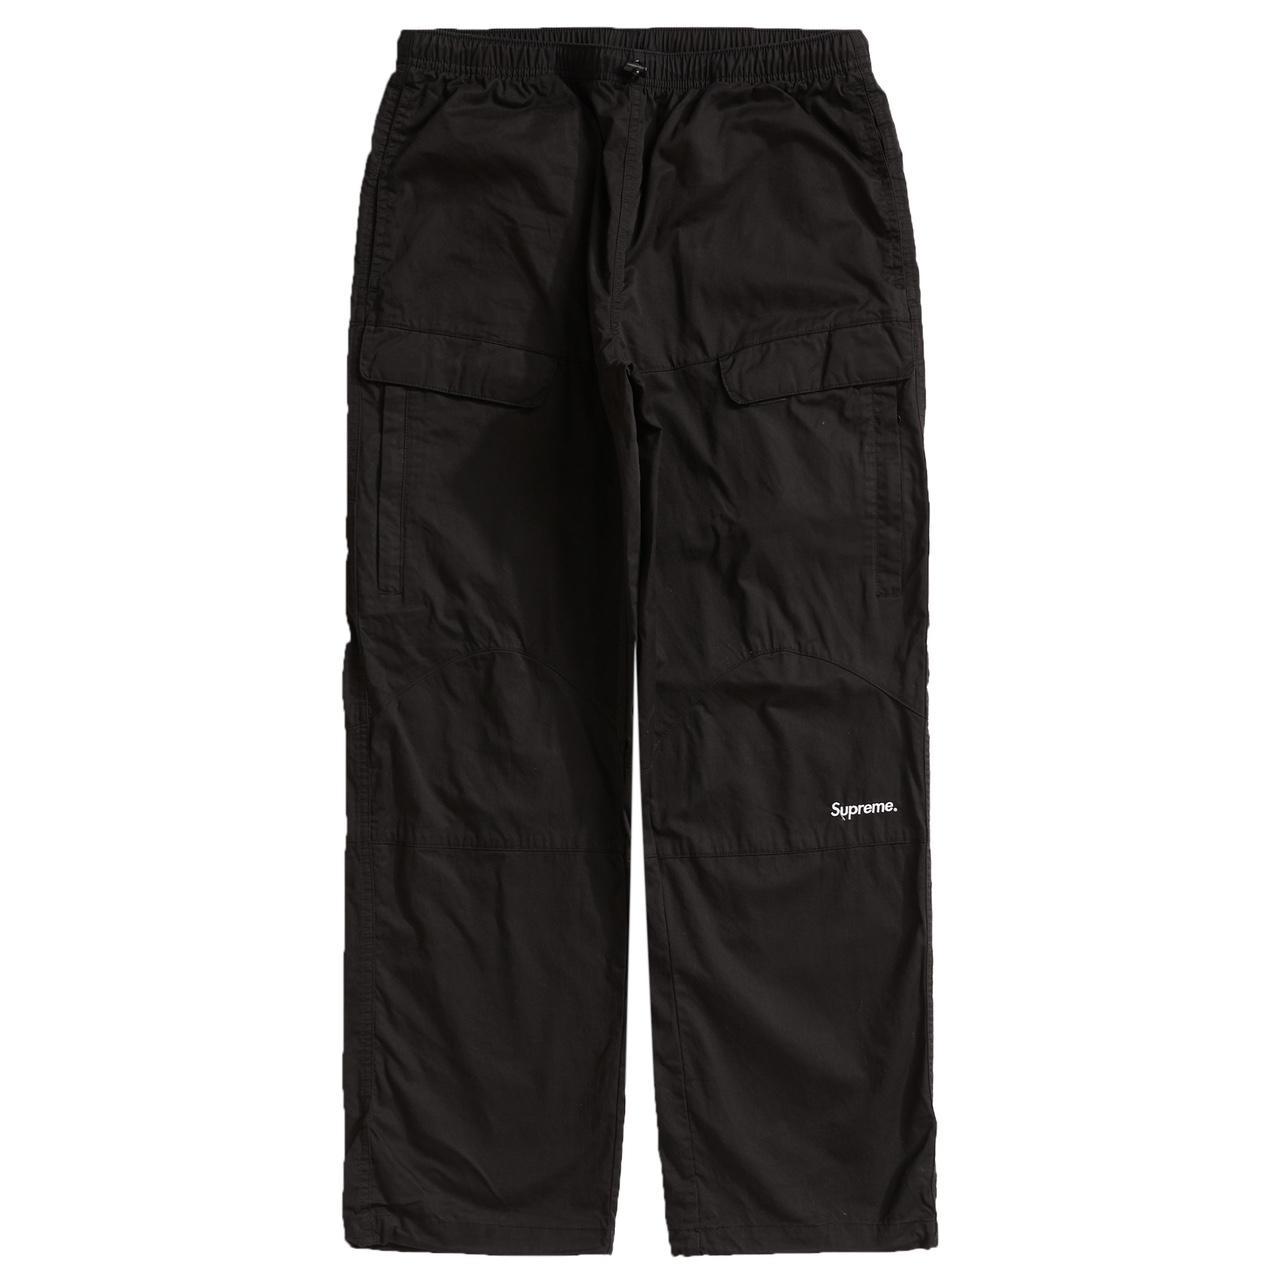 Supreme Cotton Cinch Pant from FW21. Size small/30